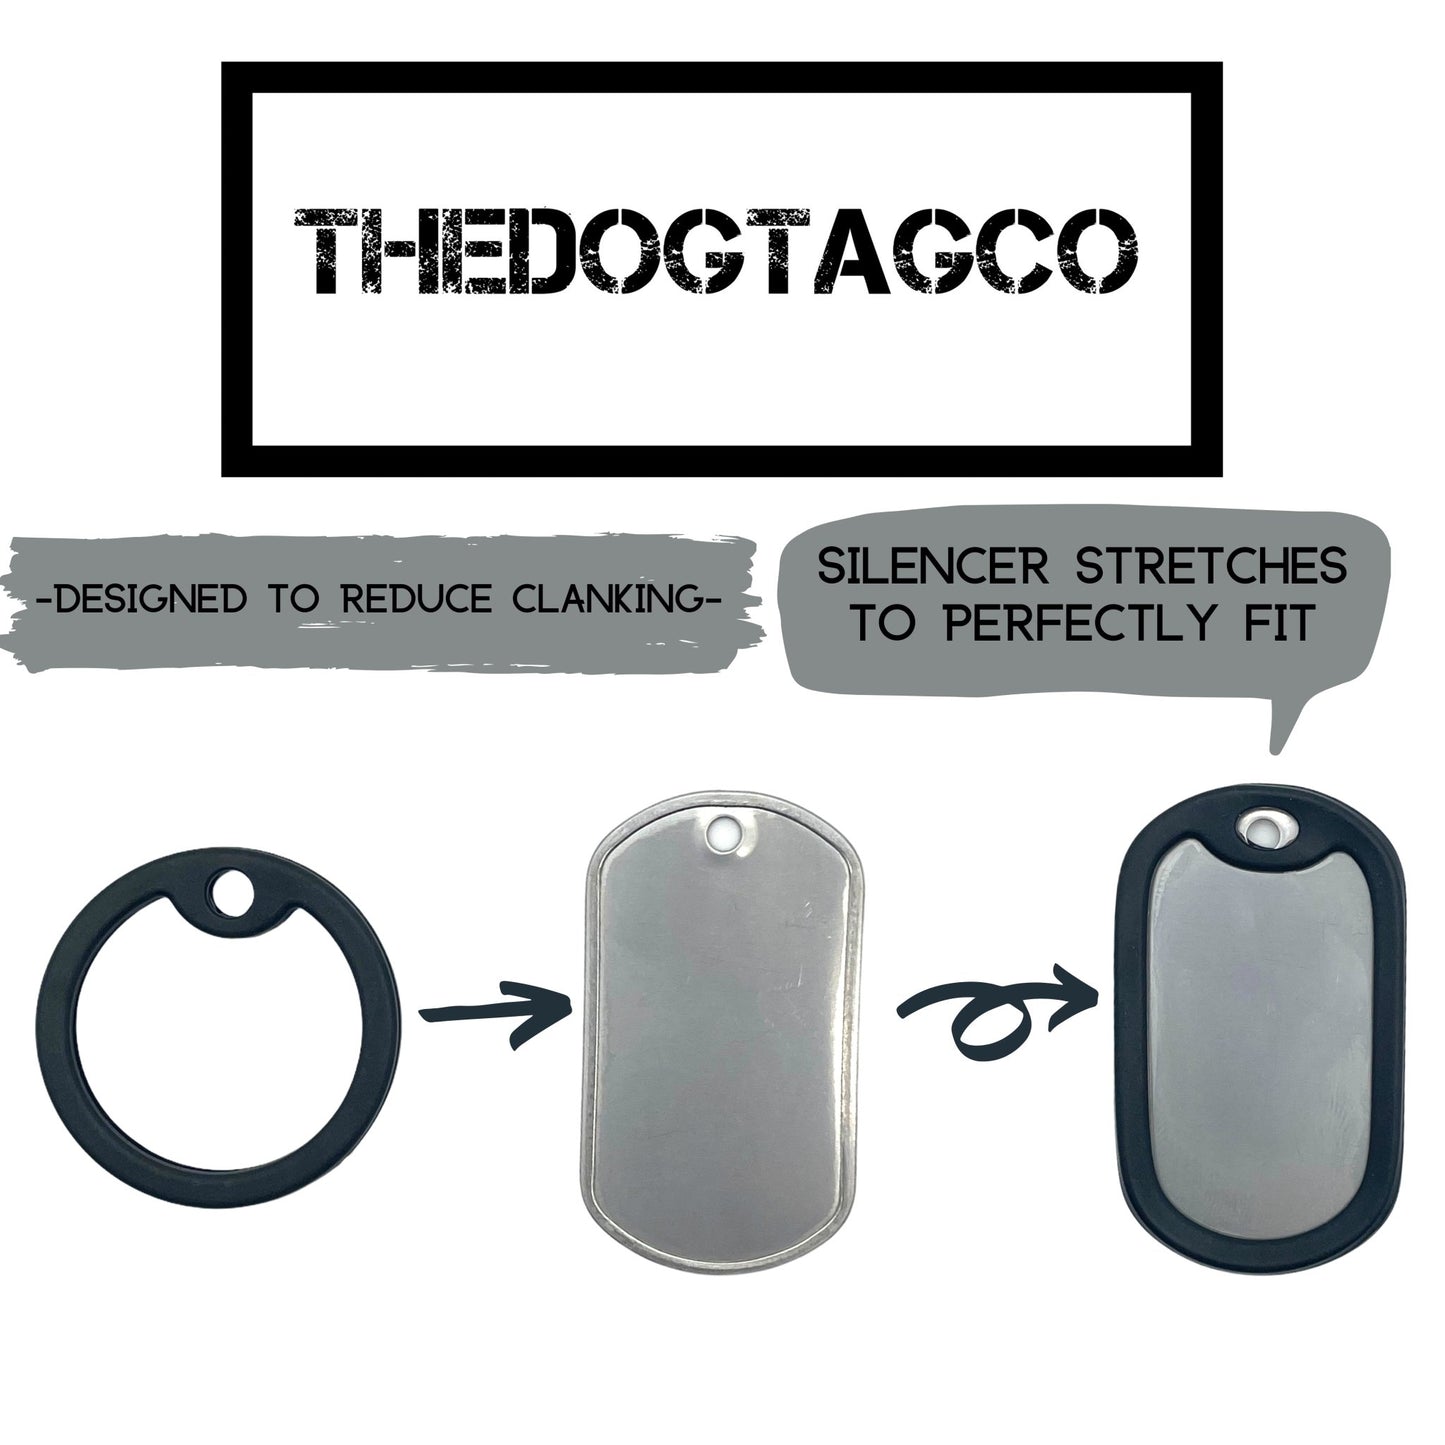 Replacement Rubber Silencers for U.S.A Military Dog Tags - TheDogTagCo